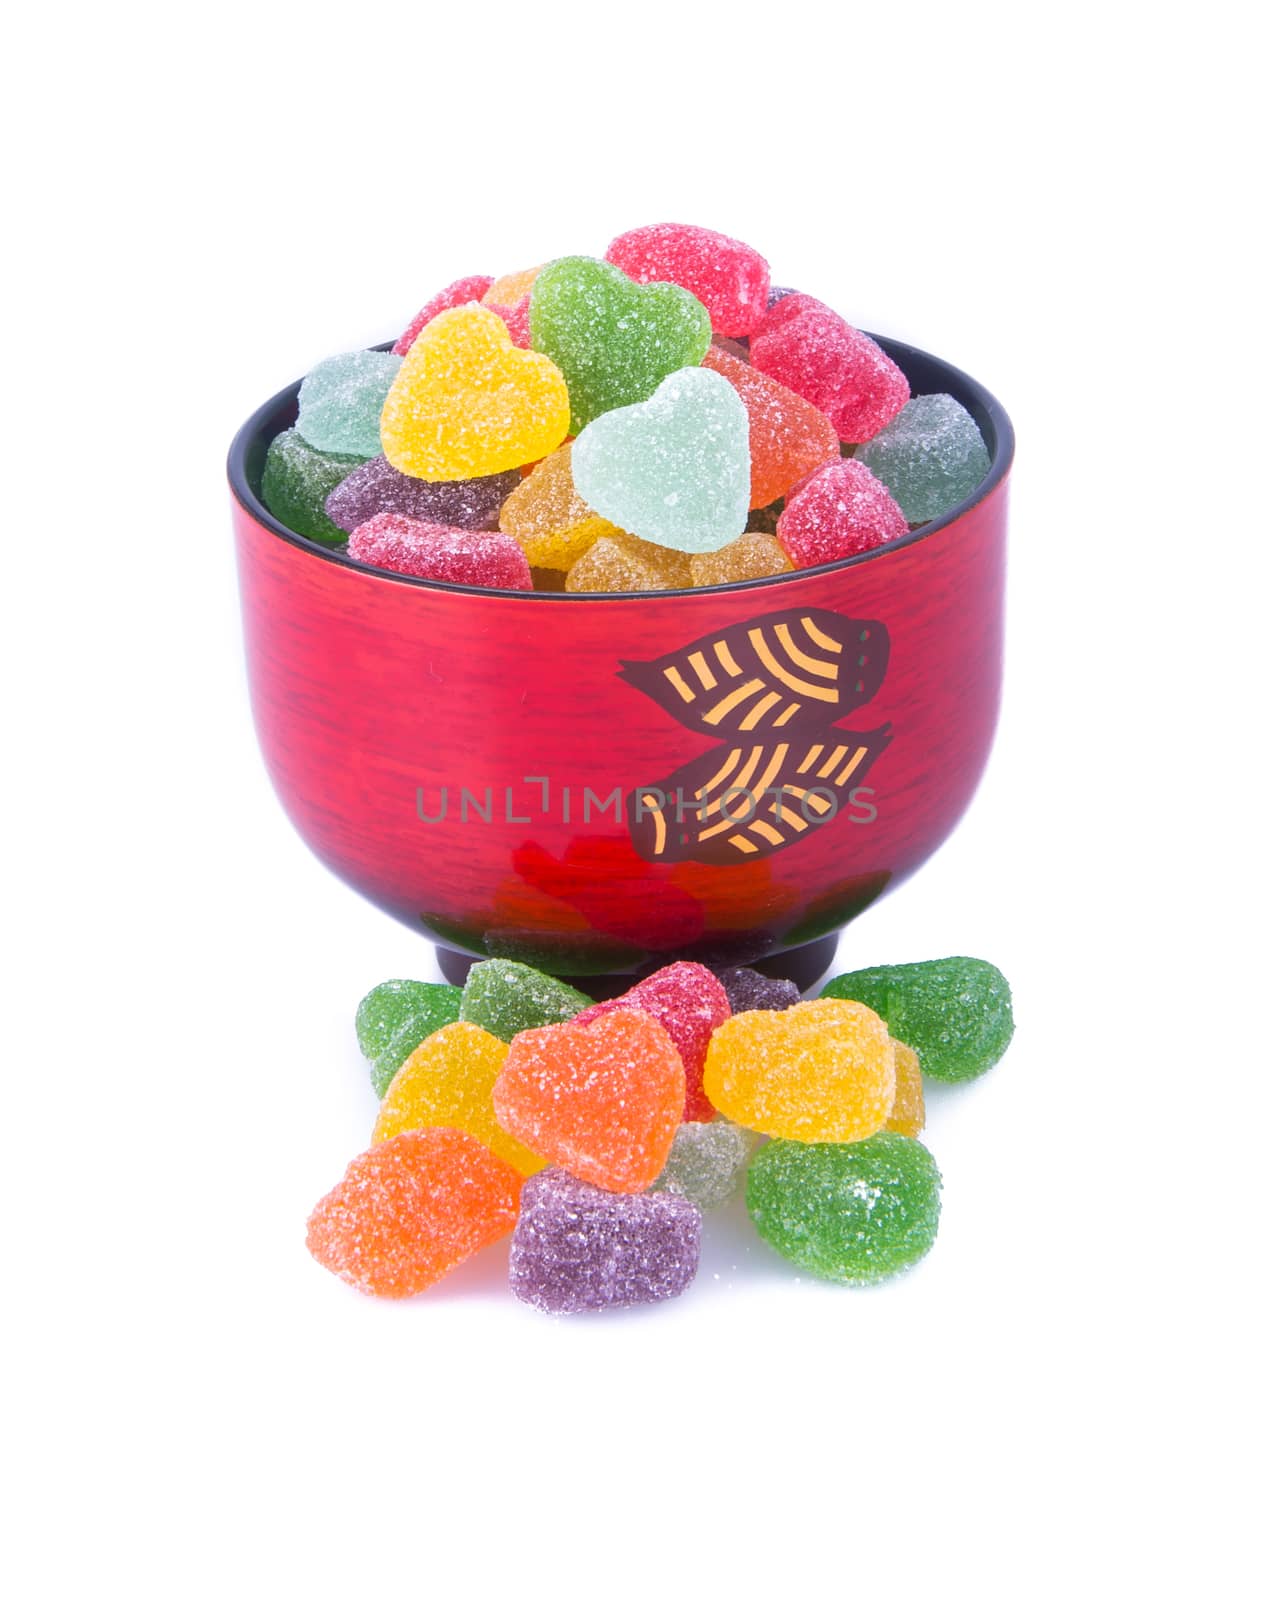 candies. jelly candies in bowl on a background. jelly candies in by heinteh